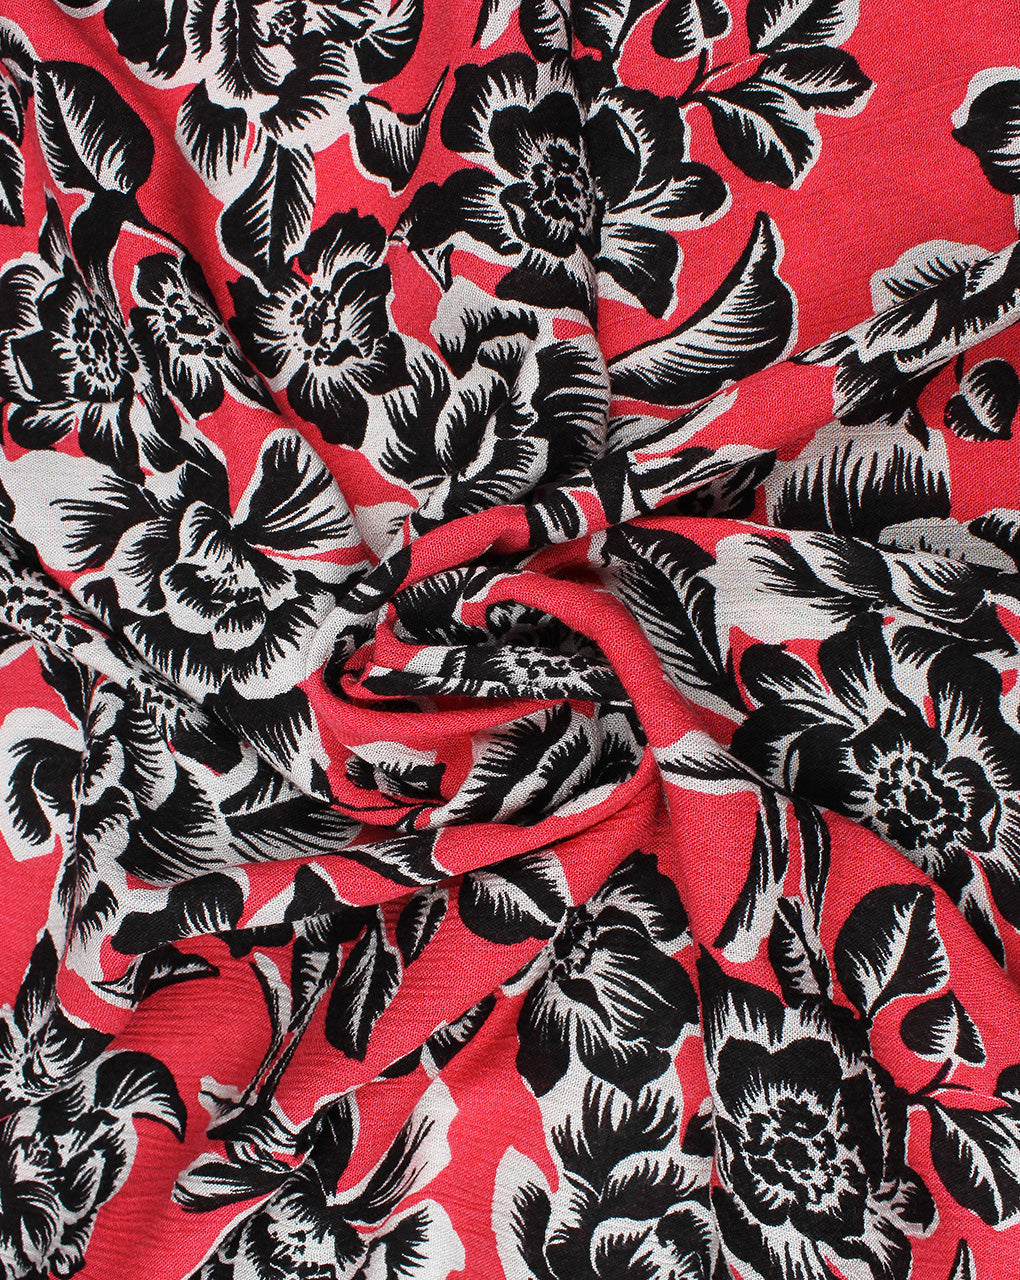 Red  And Black Floral Design Rayon Crepe Fabric